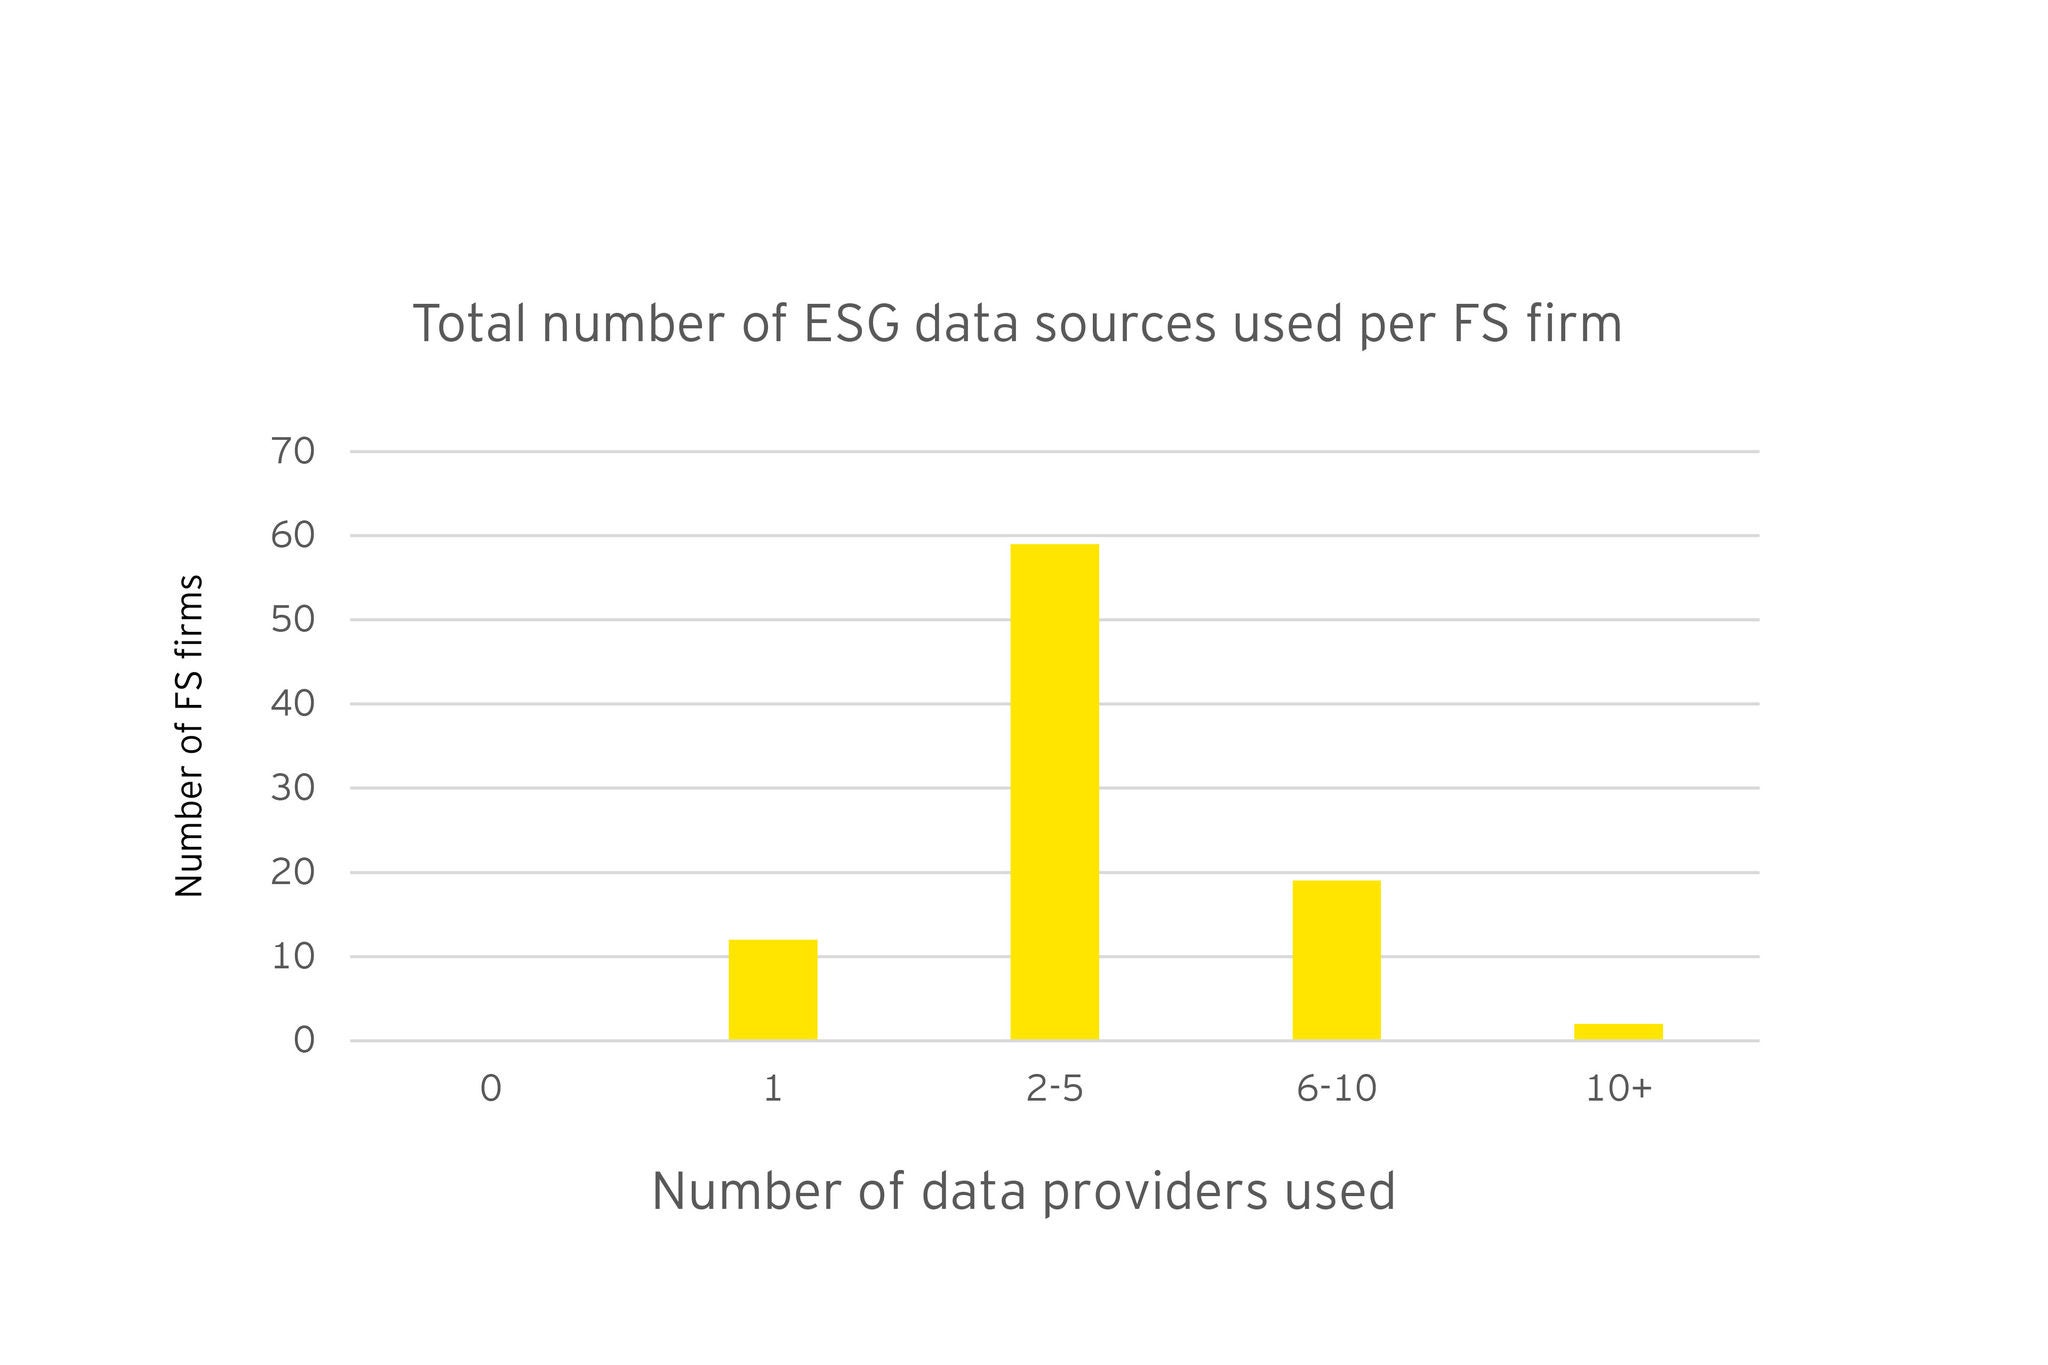 ey-total-number-of-esgdata-sources-used-per-financial-services-firm.jpg